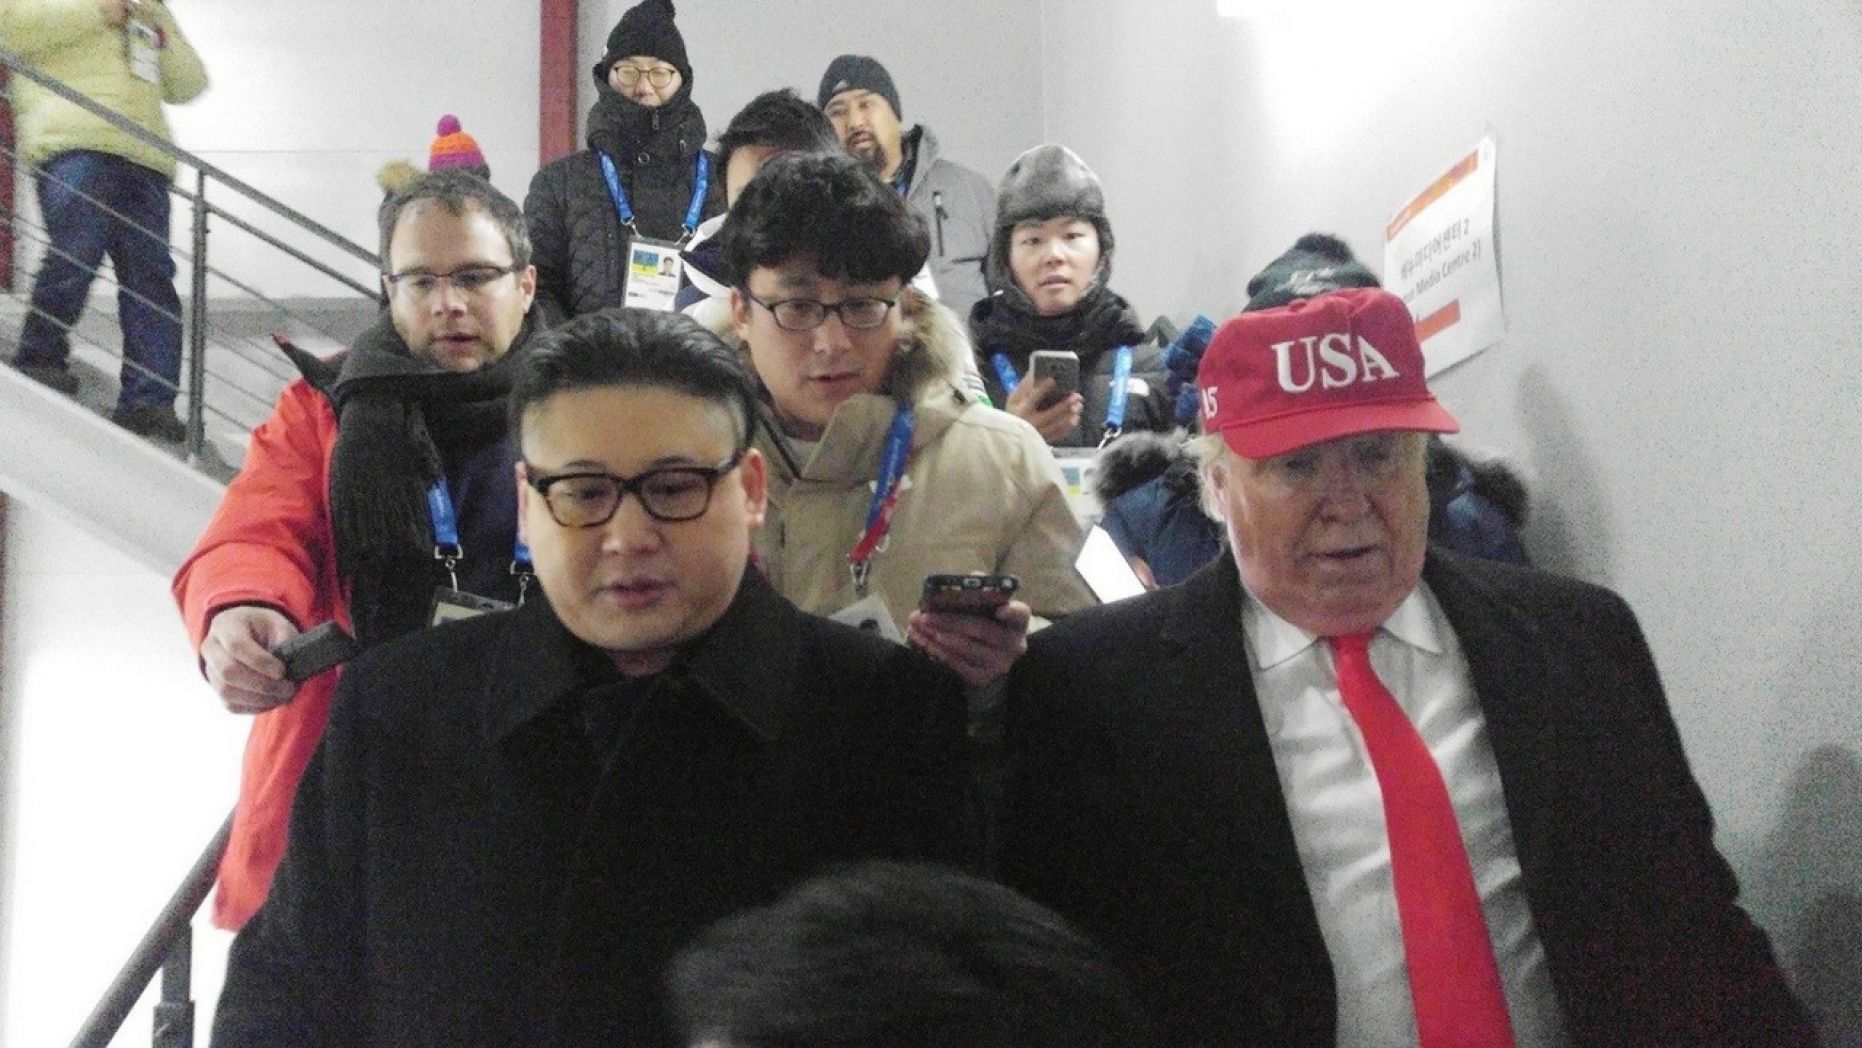 Two impersonators, bearing striking resemblances to President Trump and North Korean leader Kim Jong Un, were both booted from the Olympic Games' opening ceremony in Pyeongchang, South Korea on Friday. The “Kim” impersonator told reporters he and lookalike “Trump” were “getting along great.” He declined to reveal his real name.